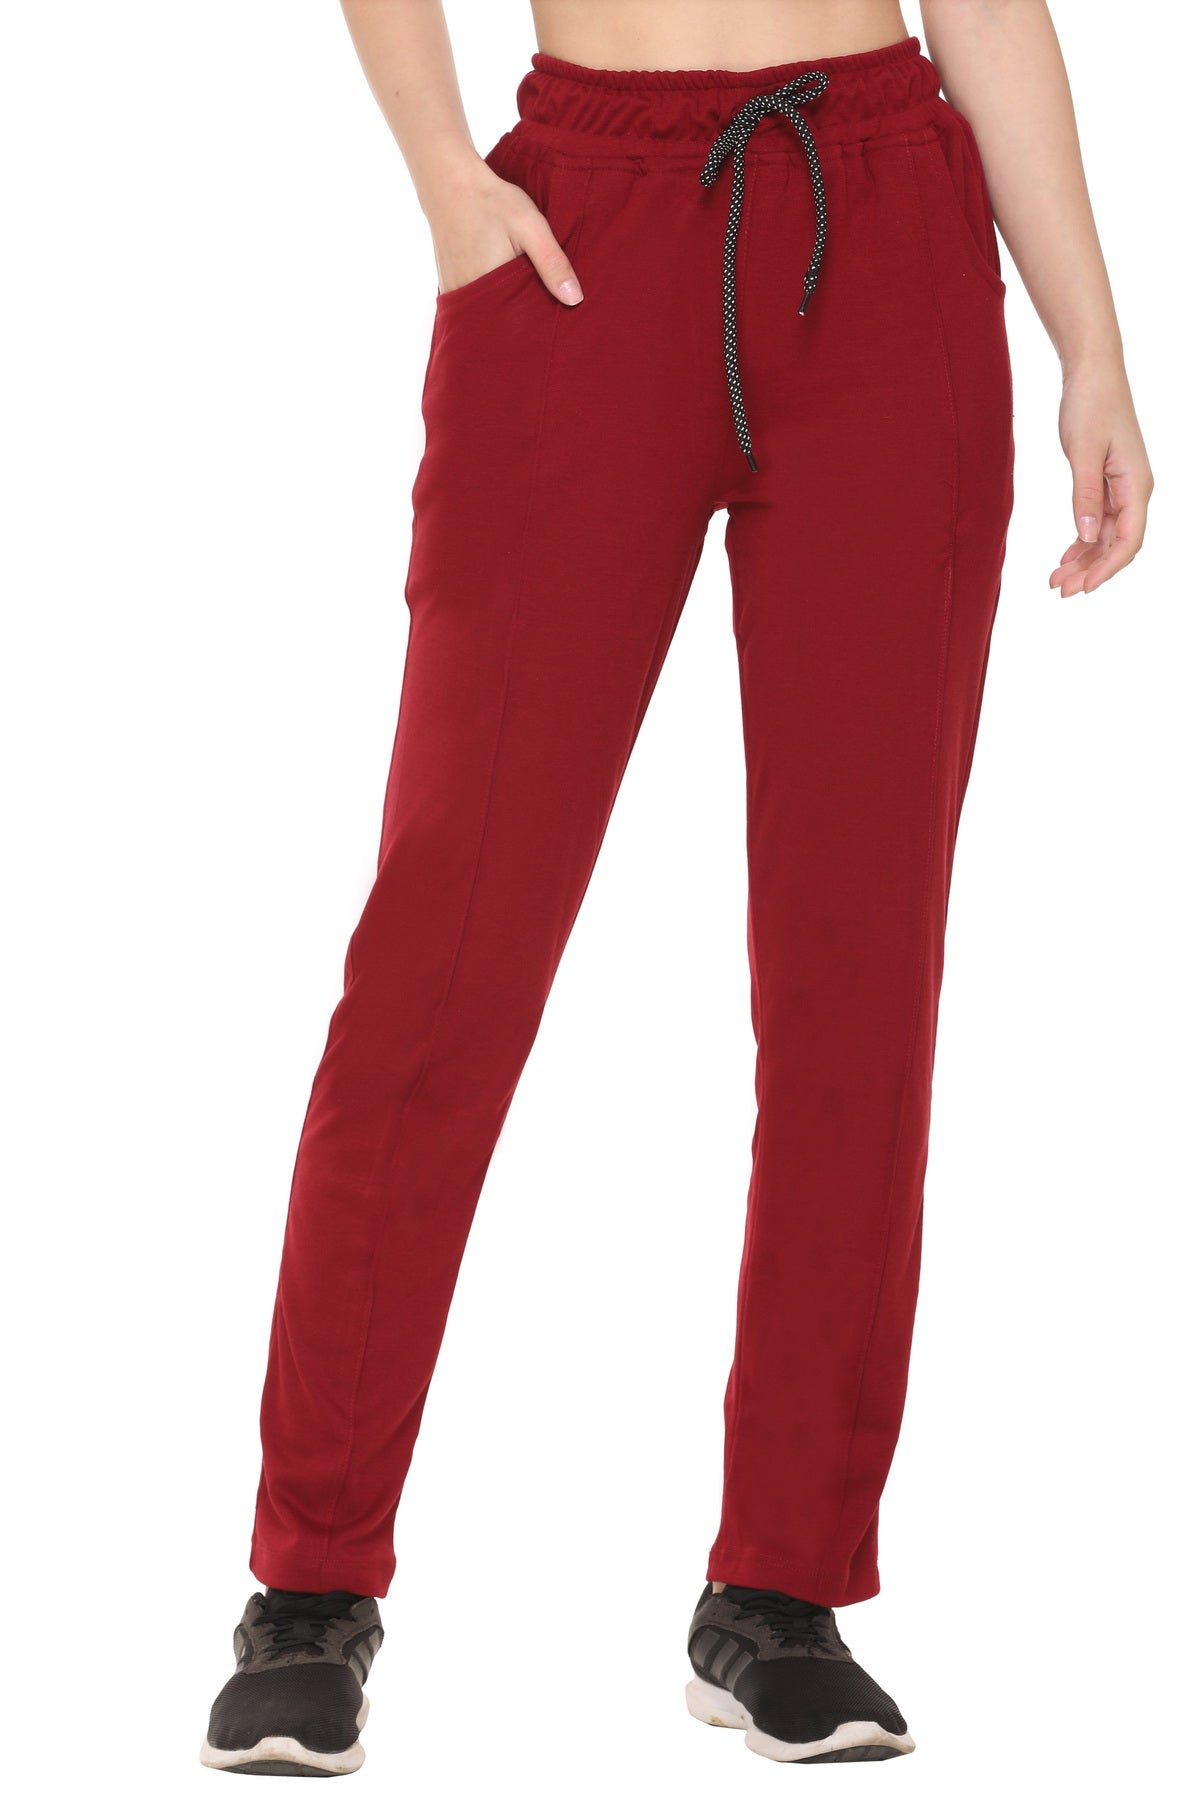 Buy Activewear Track Pants Online India, Best Prices, COD - Clovia -  AT0023P17